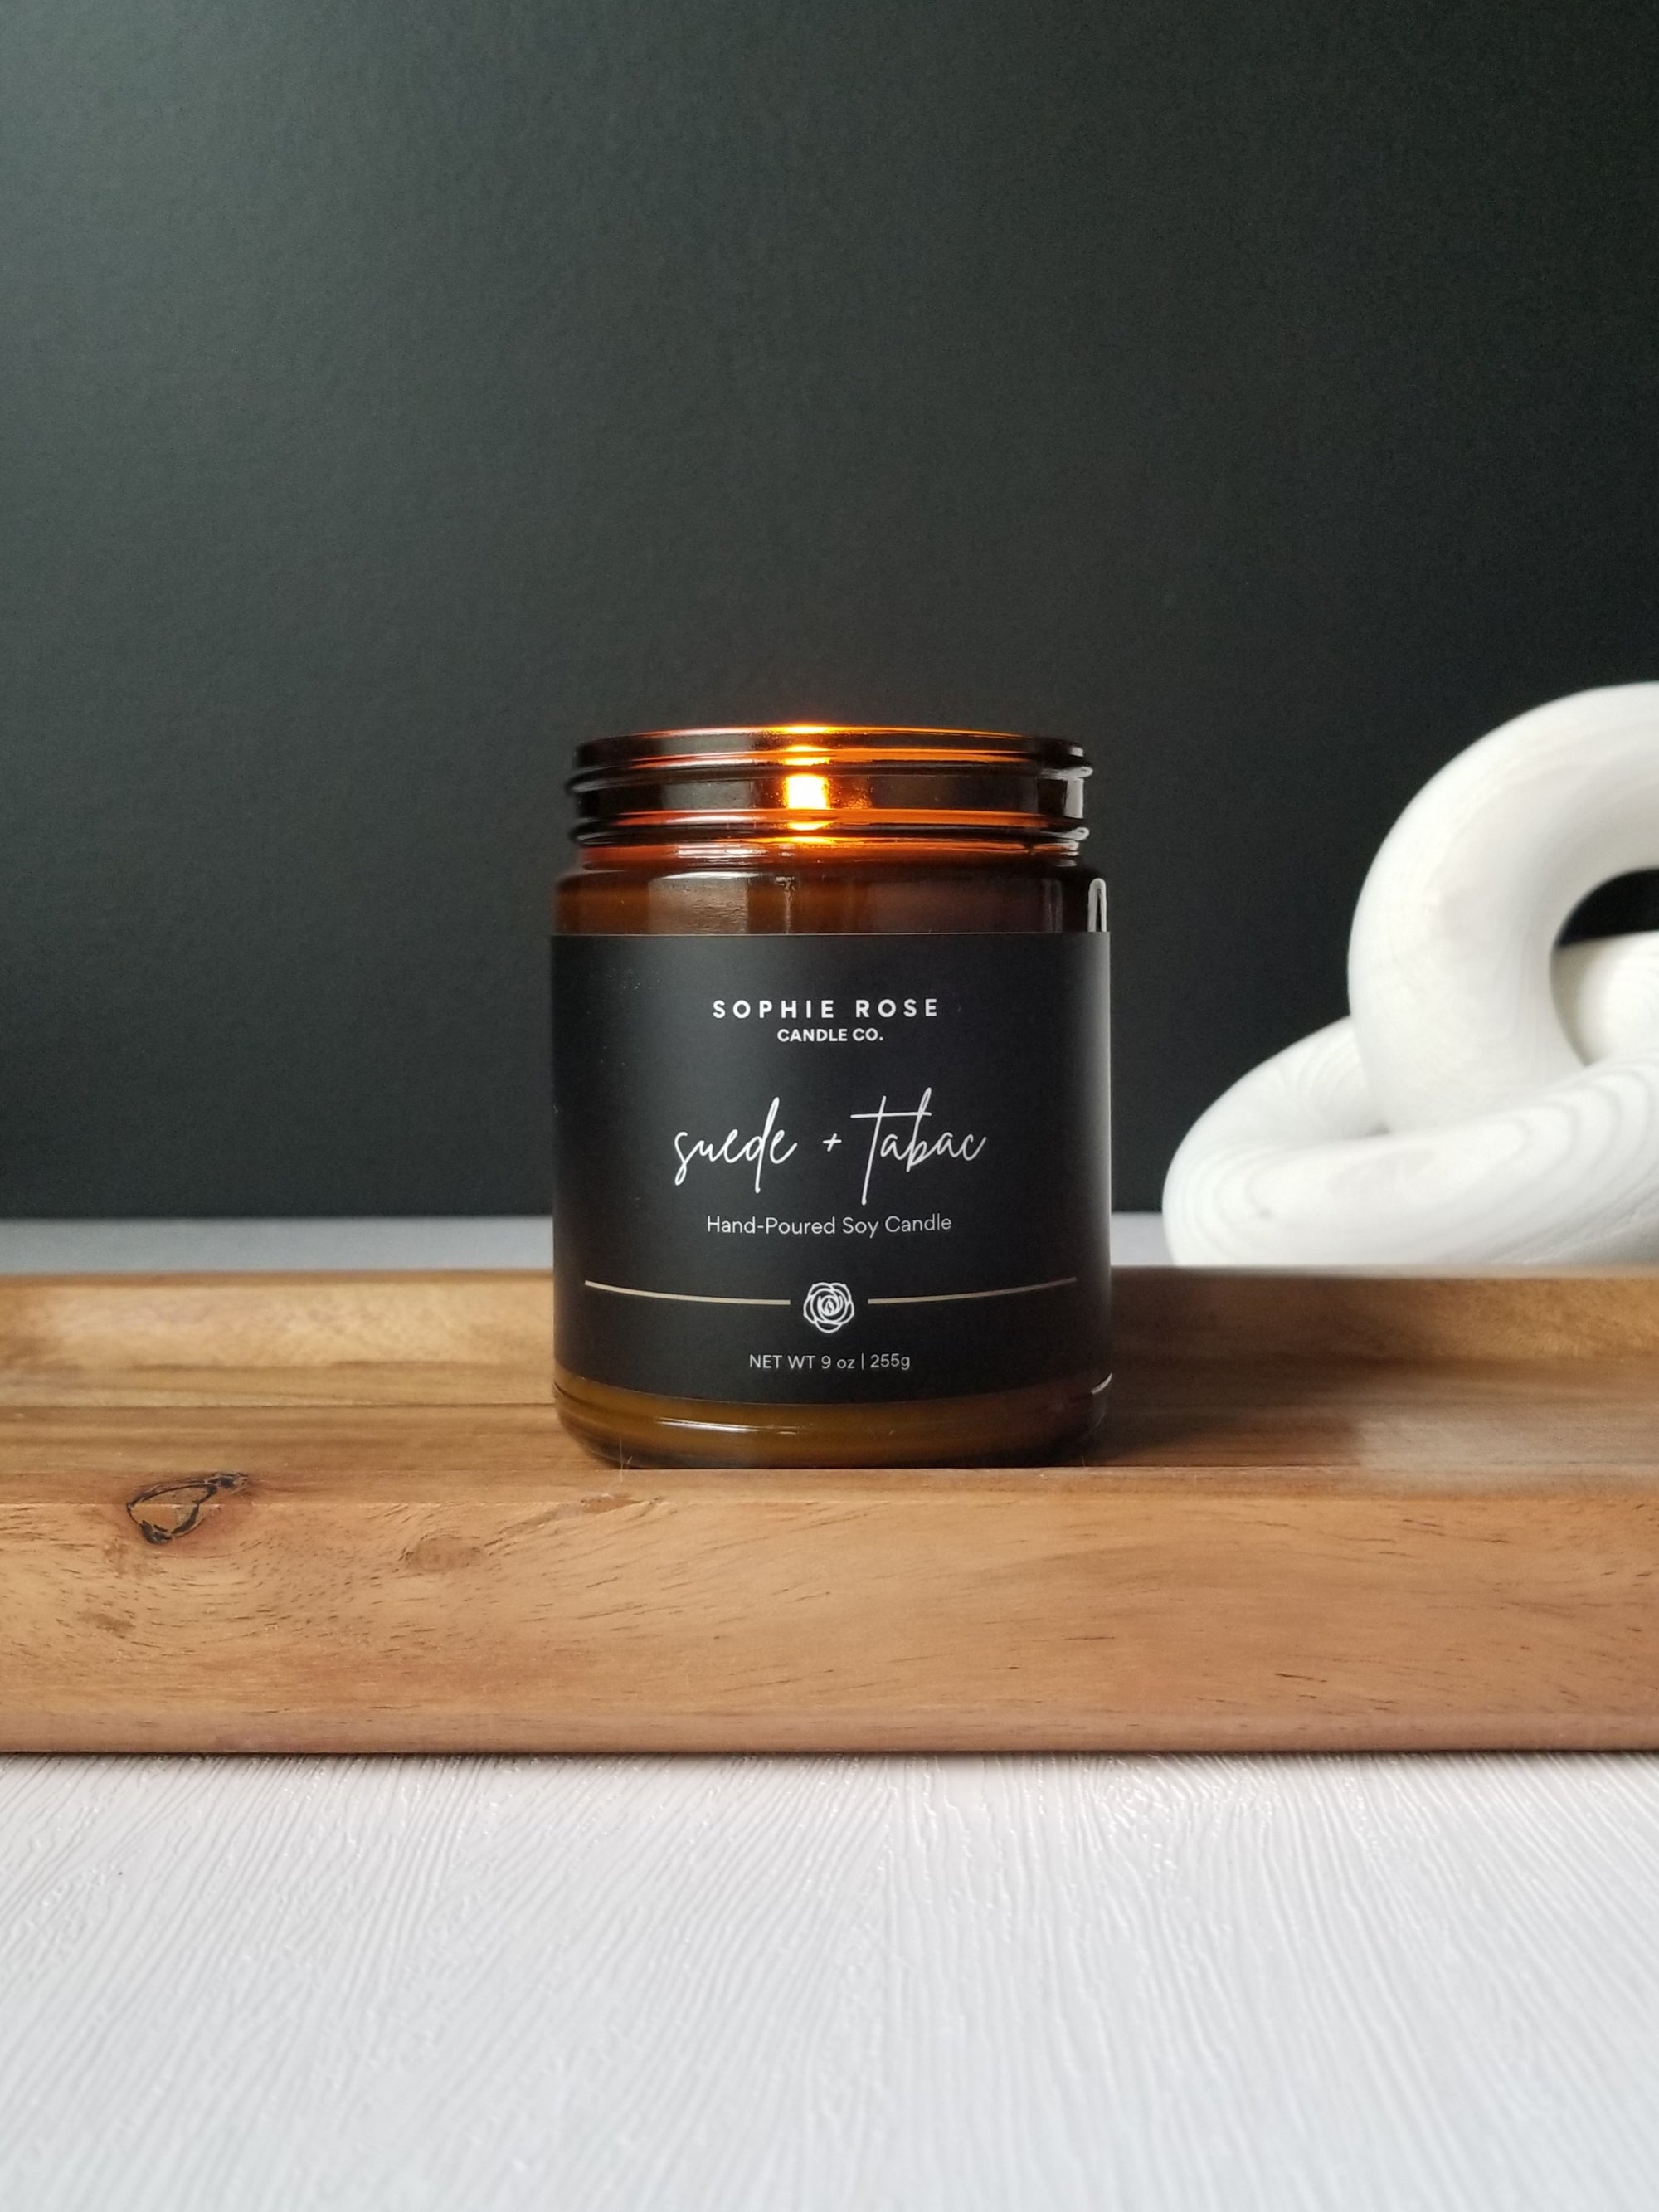 Suede + Tabac Scented Candle by Sophie Rose Candle Co.